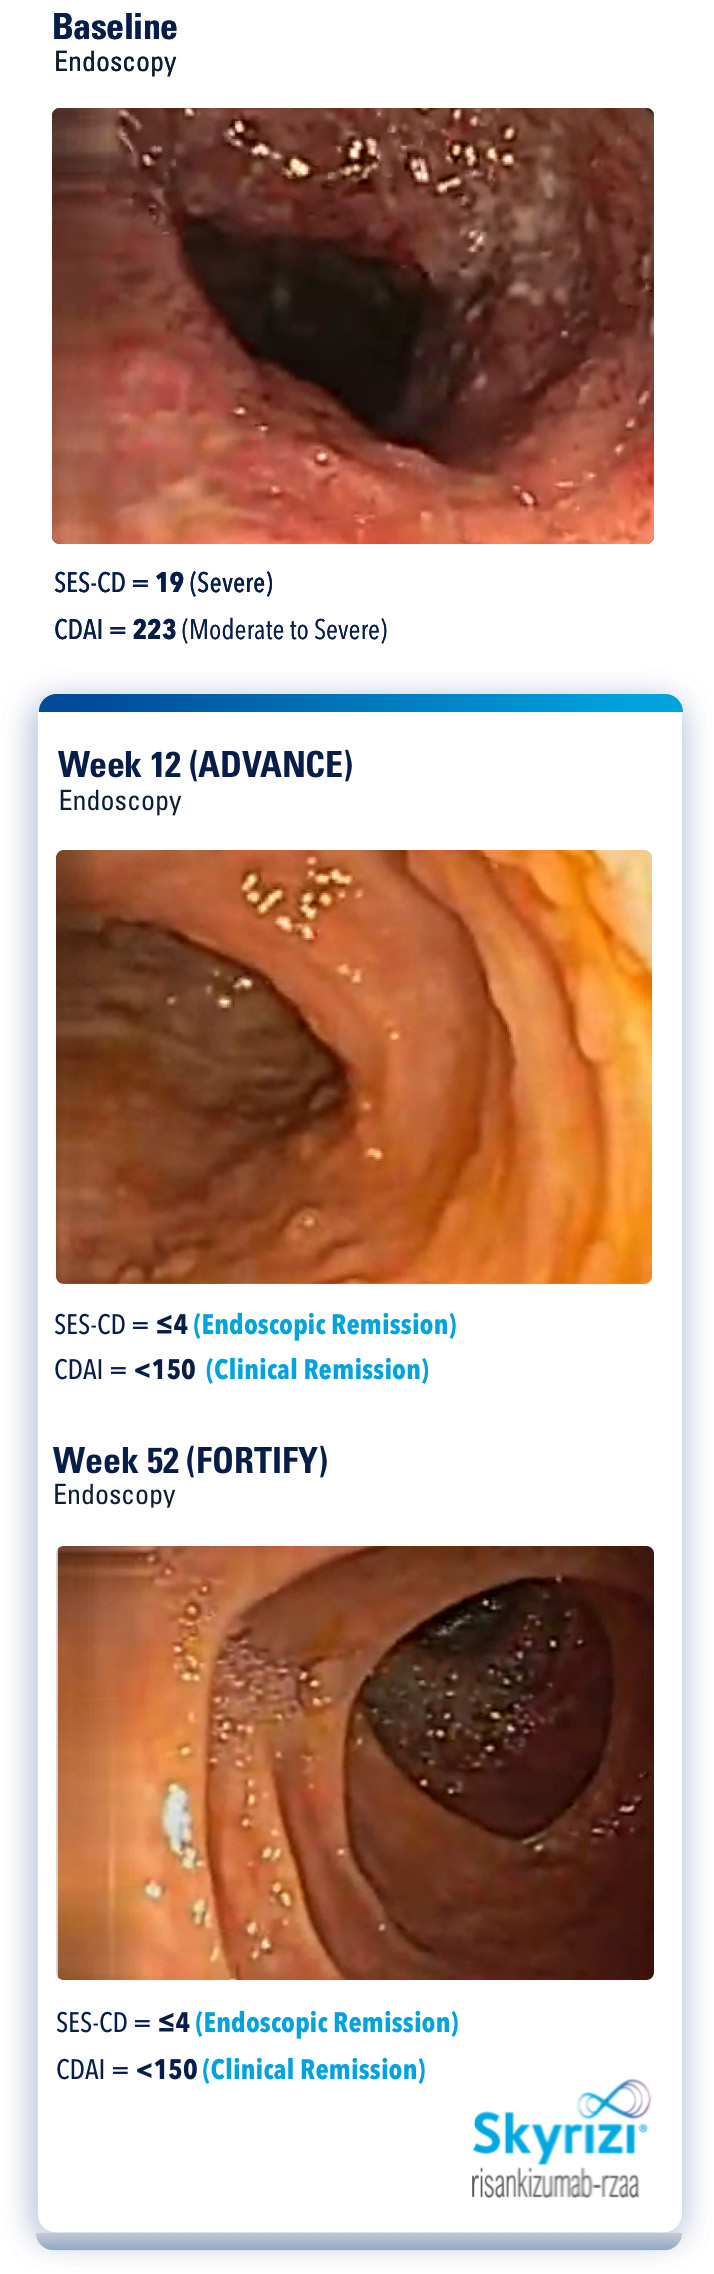 Endoscopy images of a clinical trial patient at baseline, Week 12 and Week 52